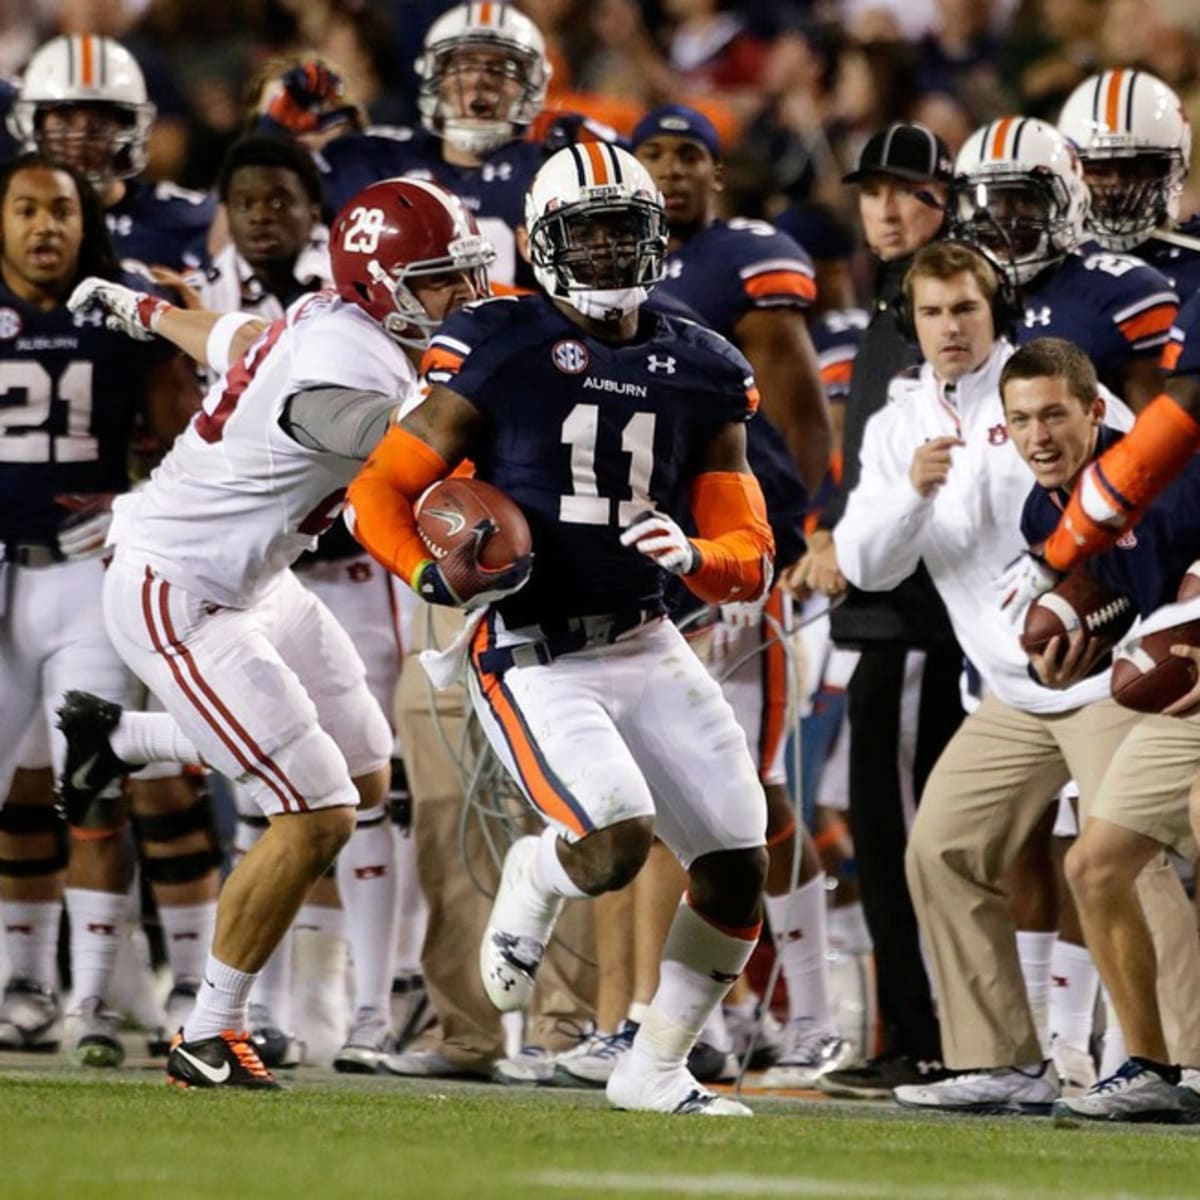 Kick Six, Two Years Later: Auburn's Chris Davis Jr. looks back at his  unforgettable touchdown - Sports Illustrated